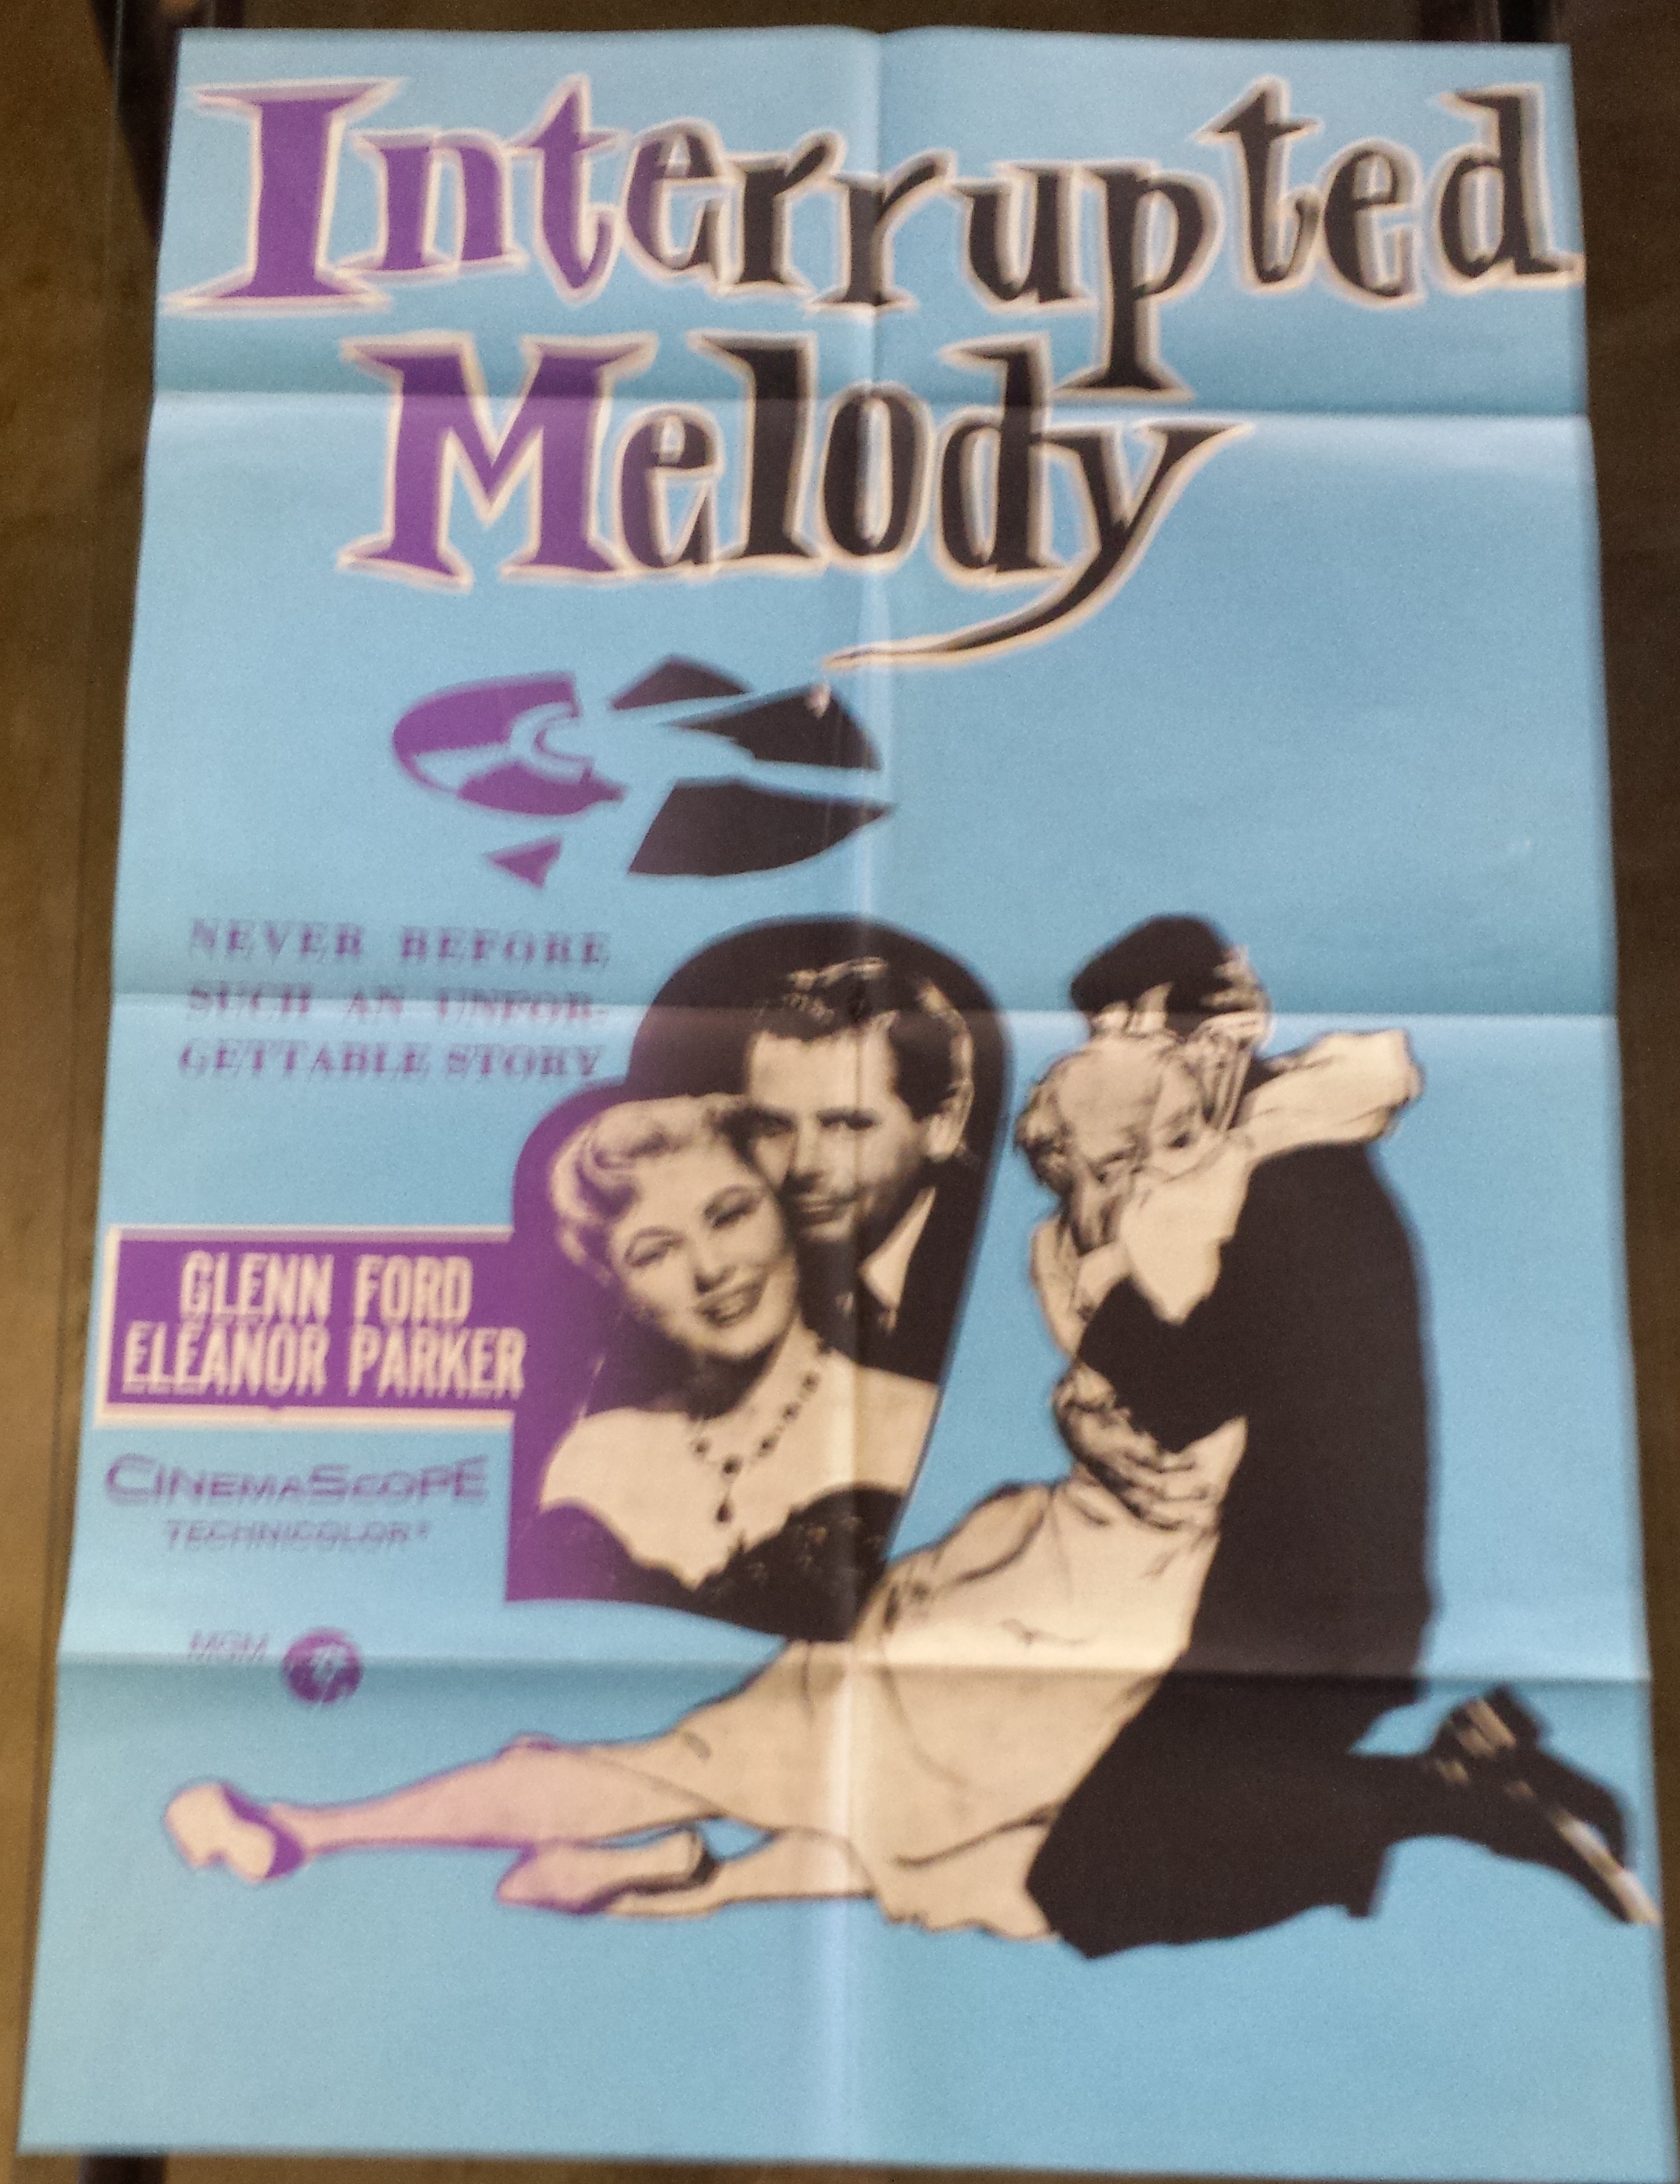 A Vintage "Interrupted Melody" Film Poster M-G-M. Folded. 1010 x 68mm